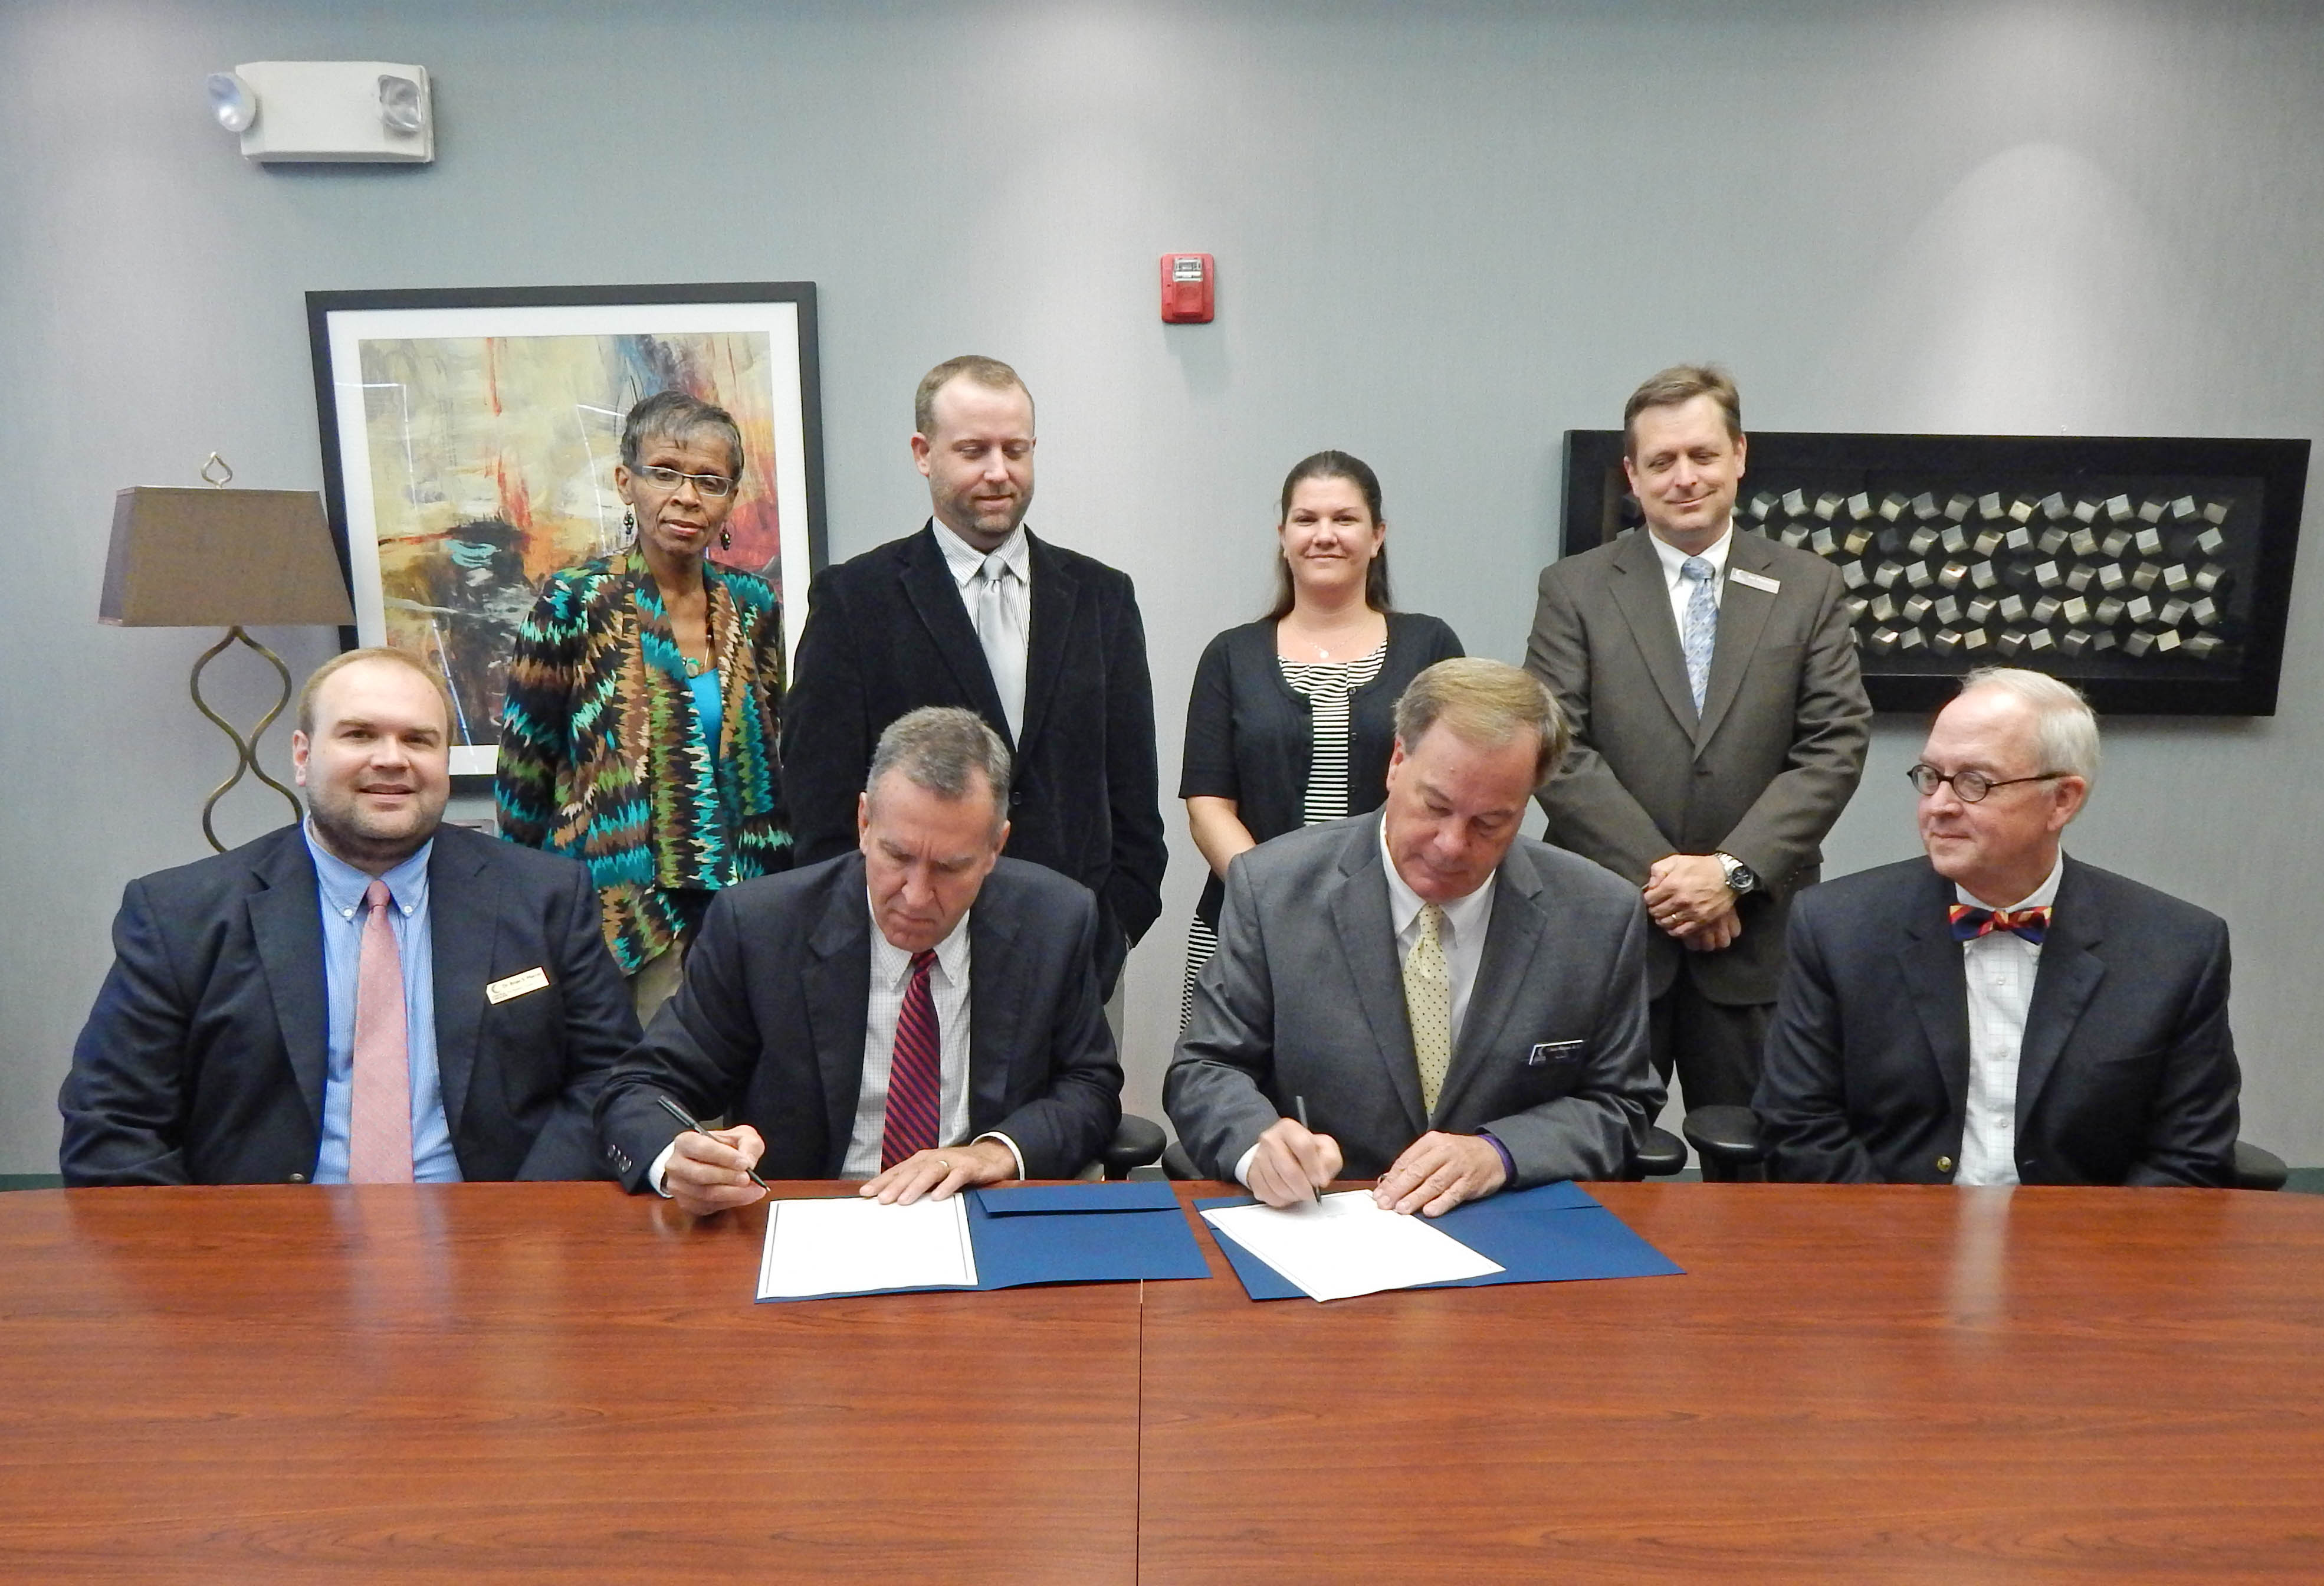 Click to enlarge,  Dr. Dewey Clark (center left), president of North Carolina Wesleyan College, and Dr. Bud Marchant, president of Central Carolina Community College, sign a Memorandum of Understanding between the two institutions that will expand their partnership. The signing took place Sept. 9 at CCCC's Lee County Campus. N.C. Wesleyan will start offering some bachelor's degree classes at the Lee Campus in May 2015, as well as having an admissions officer/advisor at the campus. Pictured with the presidents are Dr. Brian Merritt (seated left), CCCC vice president of Student Learning; Dr. Michael Brown (seated right), NCWC provost; and (back, from left) Sandra Carmichael, NCWC Durham Campus director; Dr. Evan Duff, NCWC vice president of Adult and Professional Studies; Katie Farrell, NCWC executive director of Community College Partnerships; and Jon Matthews, CCCC associate provost/dean of Business &amp; Media Technologies, Education and University Transfer. For more information about CCCC programs, go to www.cccc.edu. For more information about N.C. Wesleyan, visit www.ncwc.edu. 